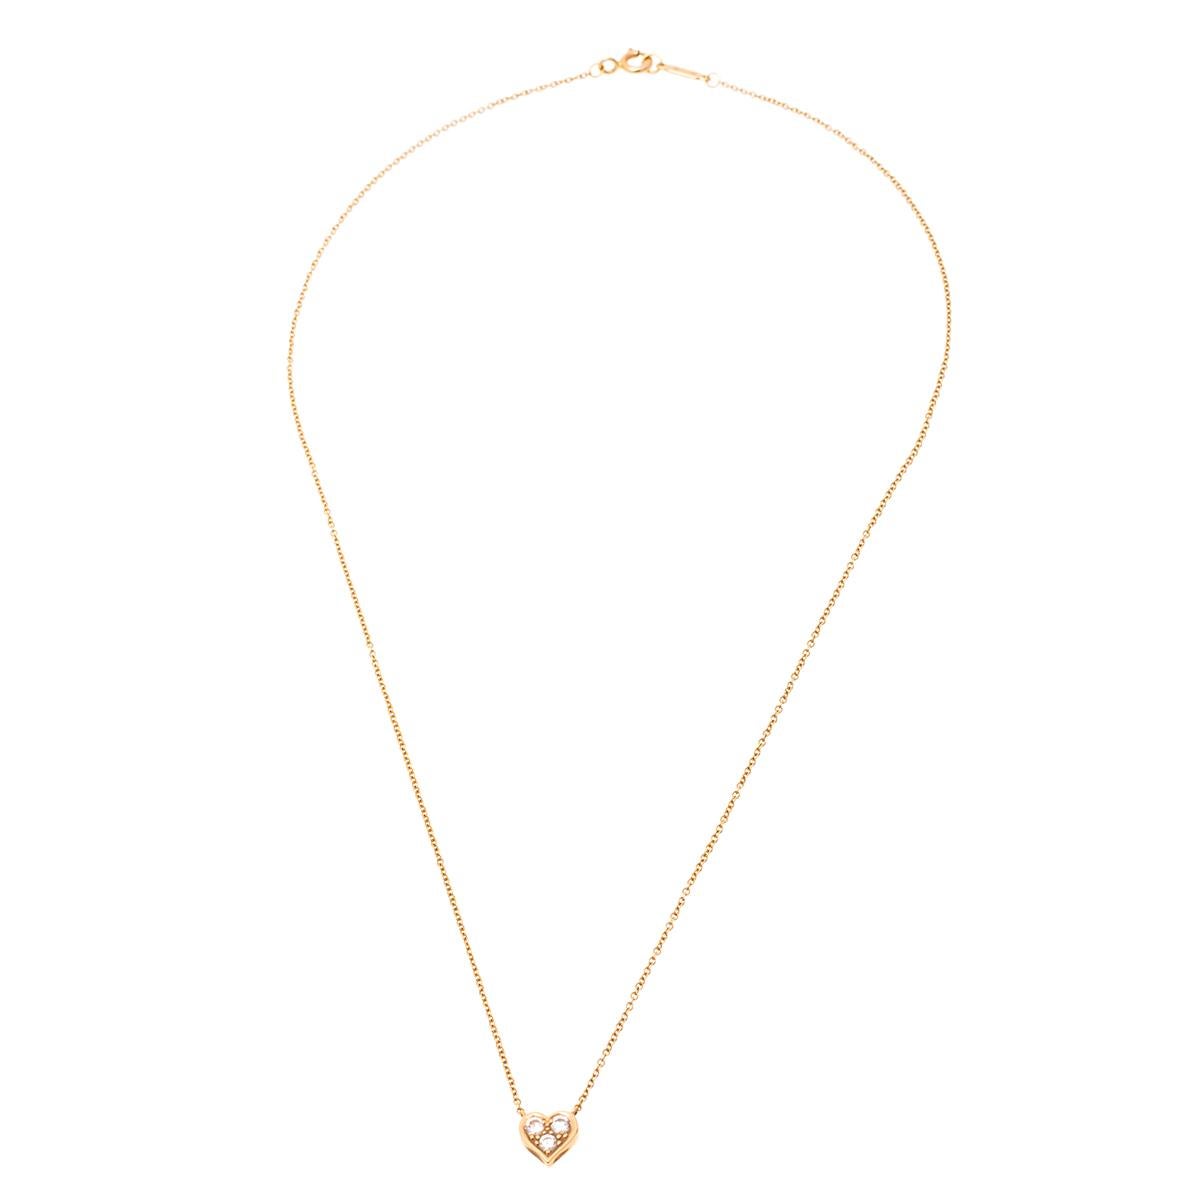 This lovely necklace by Tiffany & Co. will make a timeless addition to your collection. Crafted from precious 18k yellow gold, this gorgeous creation has a chain that holds a lovely heart pendant. The pendant is adorned with three shimmery diamonds.